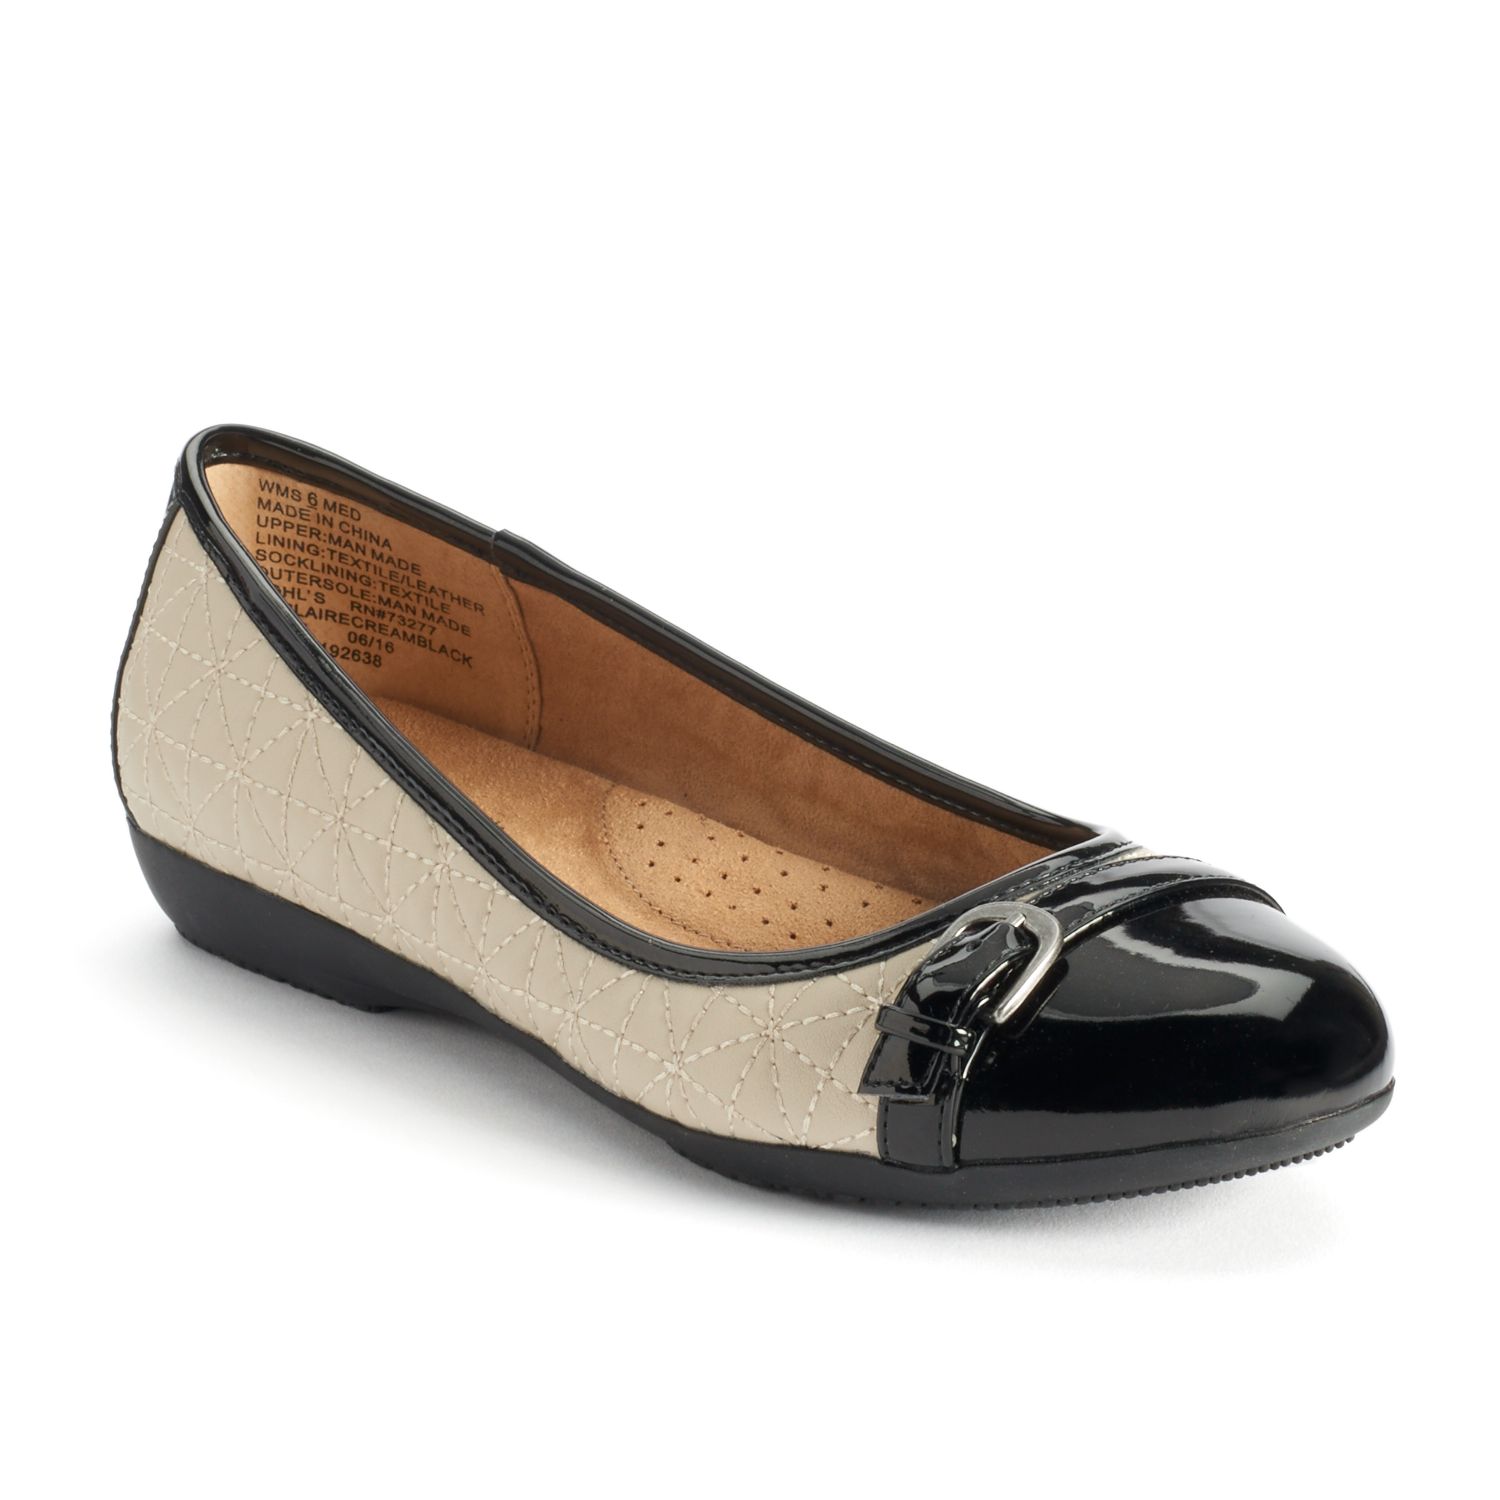 Ortholite Quilted Ballet Flats, Size 